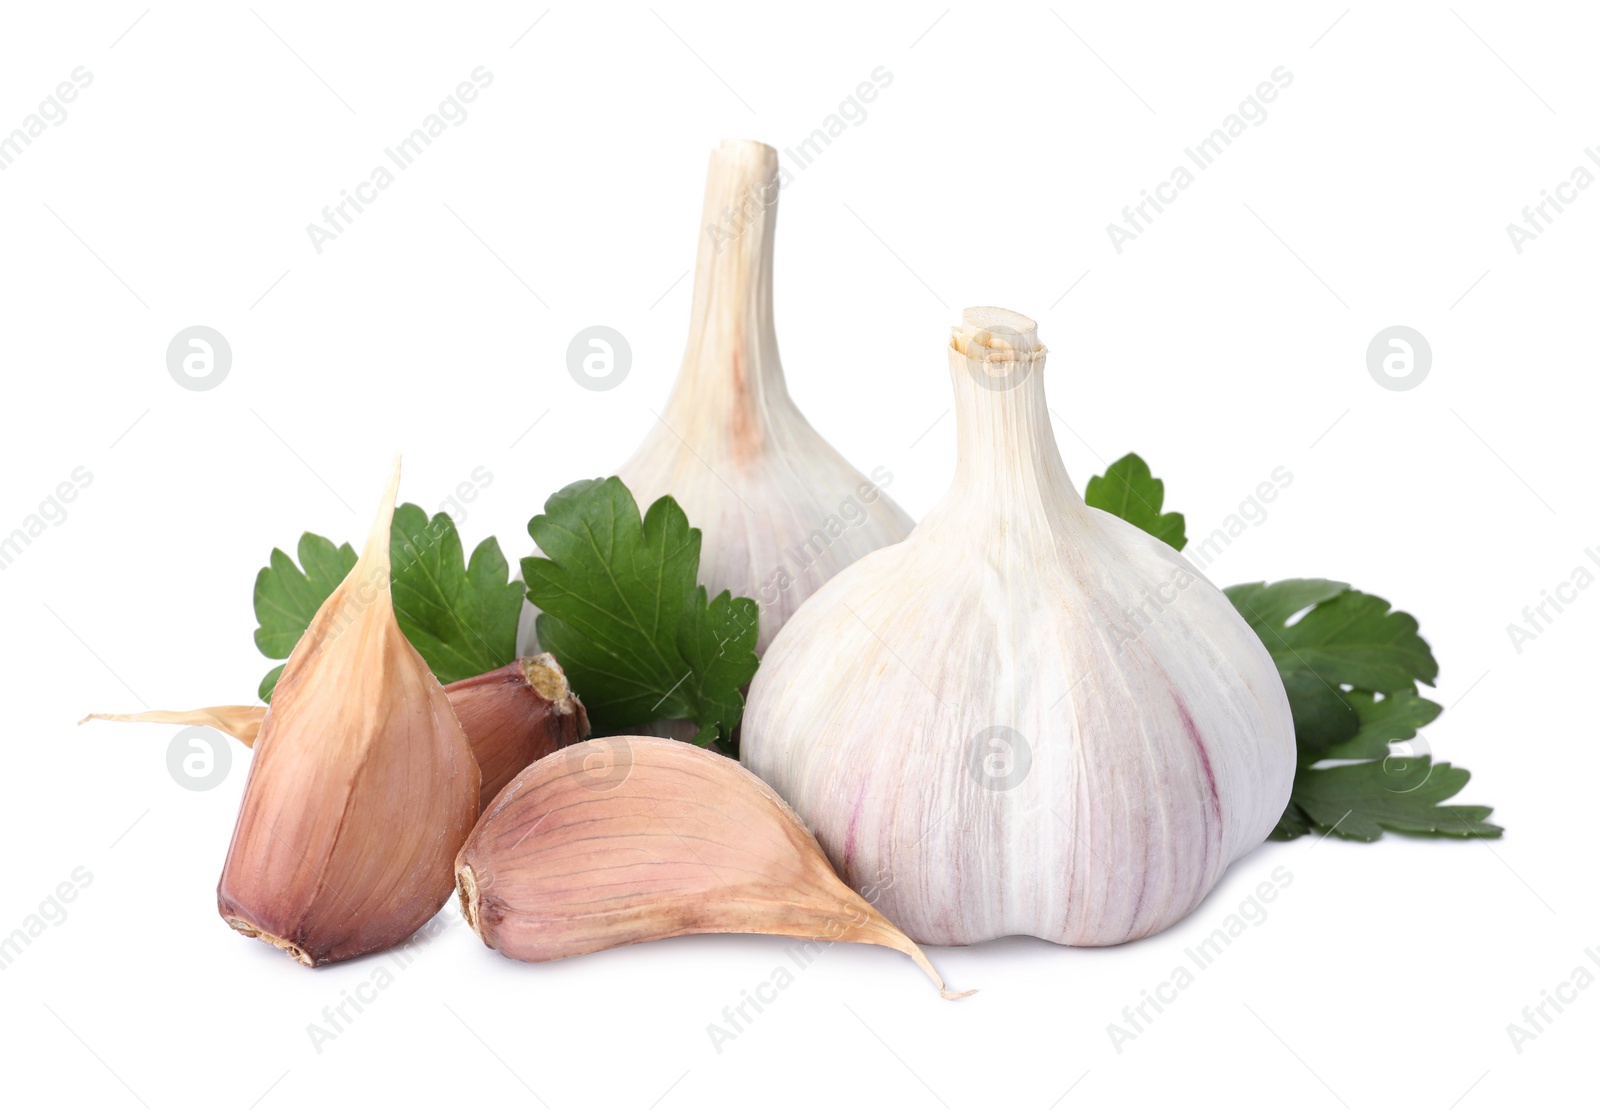 Photo of Fresh garlic bulbs and cloves with parsley on white background. Organic food